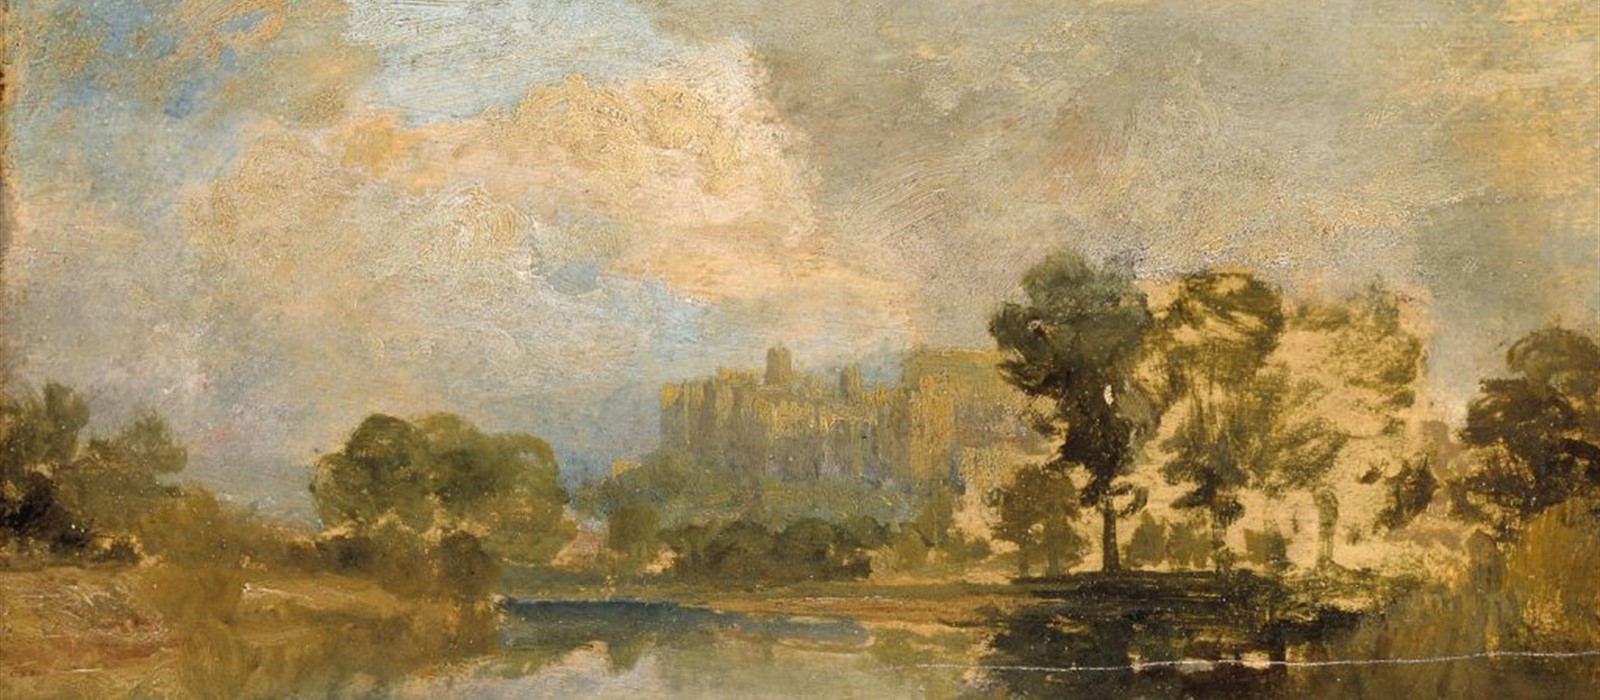 Painting of landscape